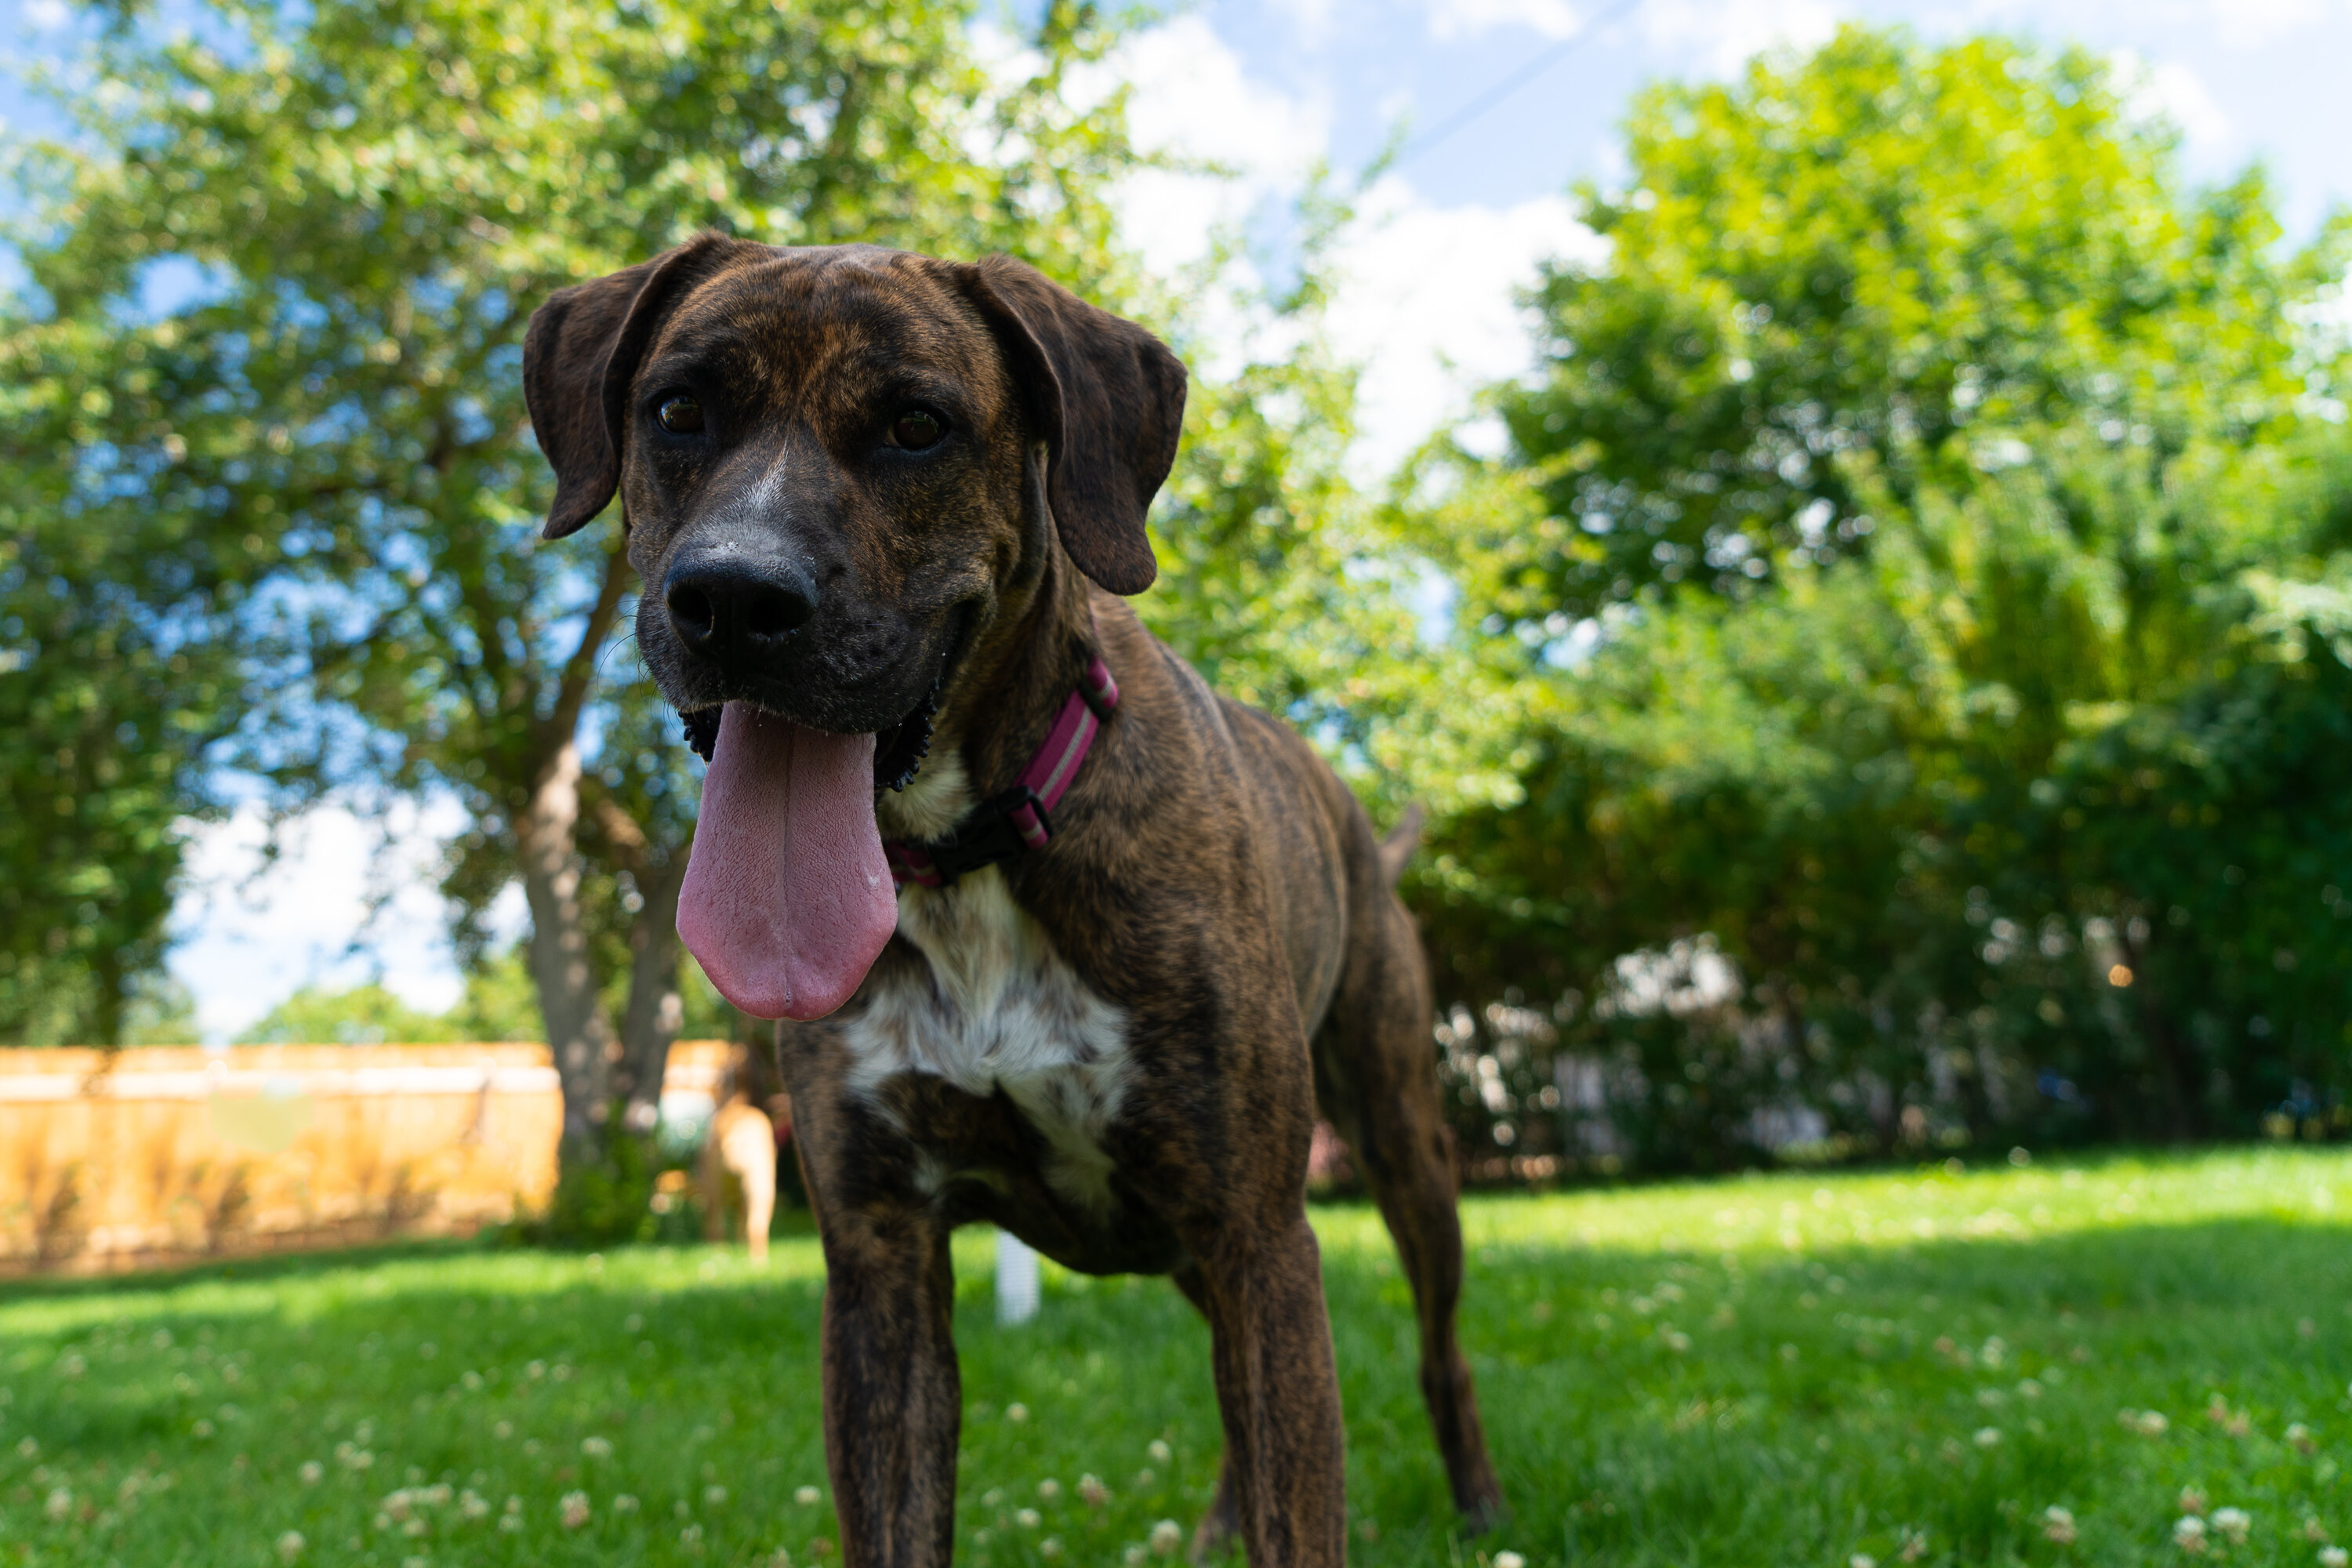 A plott hound dog with mostly brown fur and some white spots looking at the camera with its tongue out, the background is a yard with a fence and green grass 